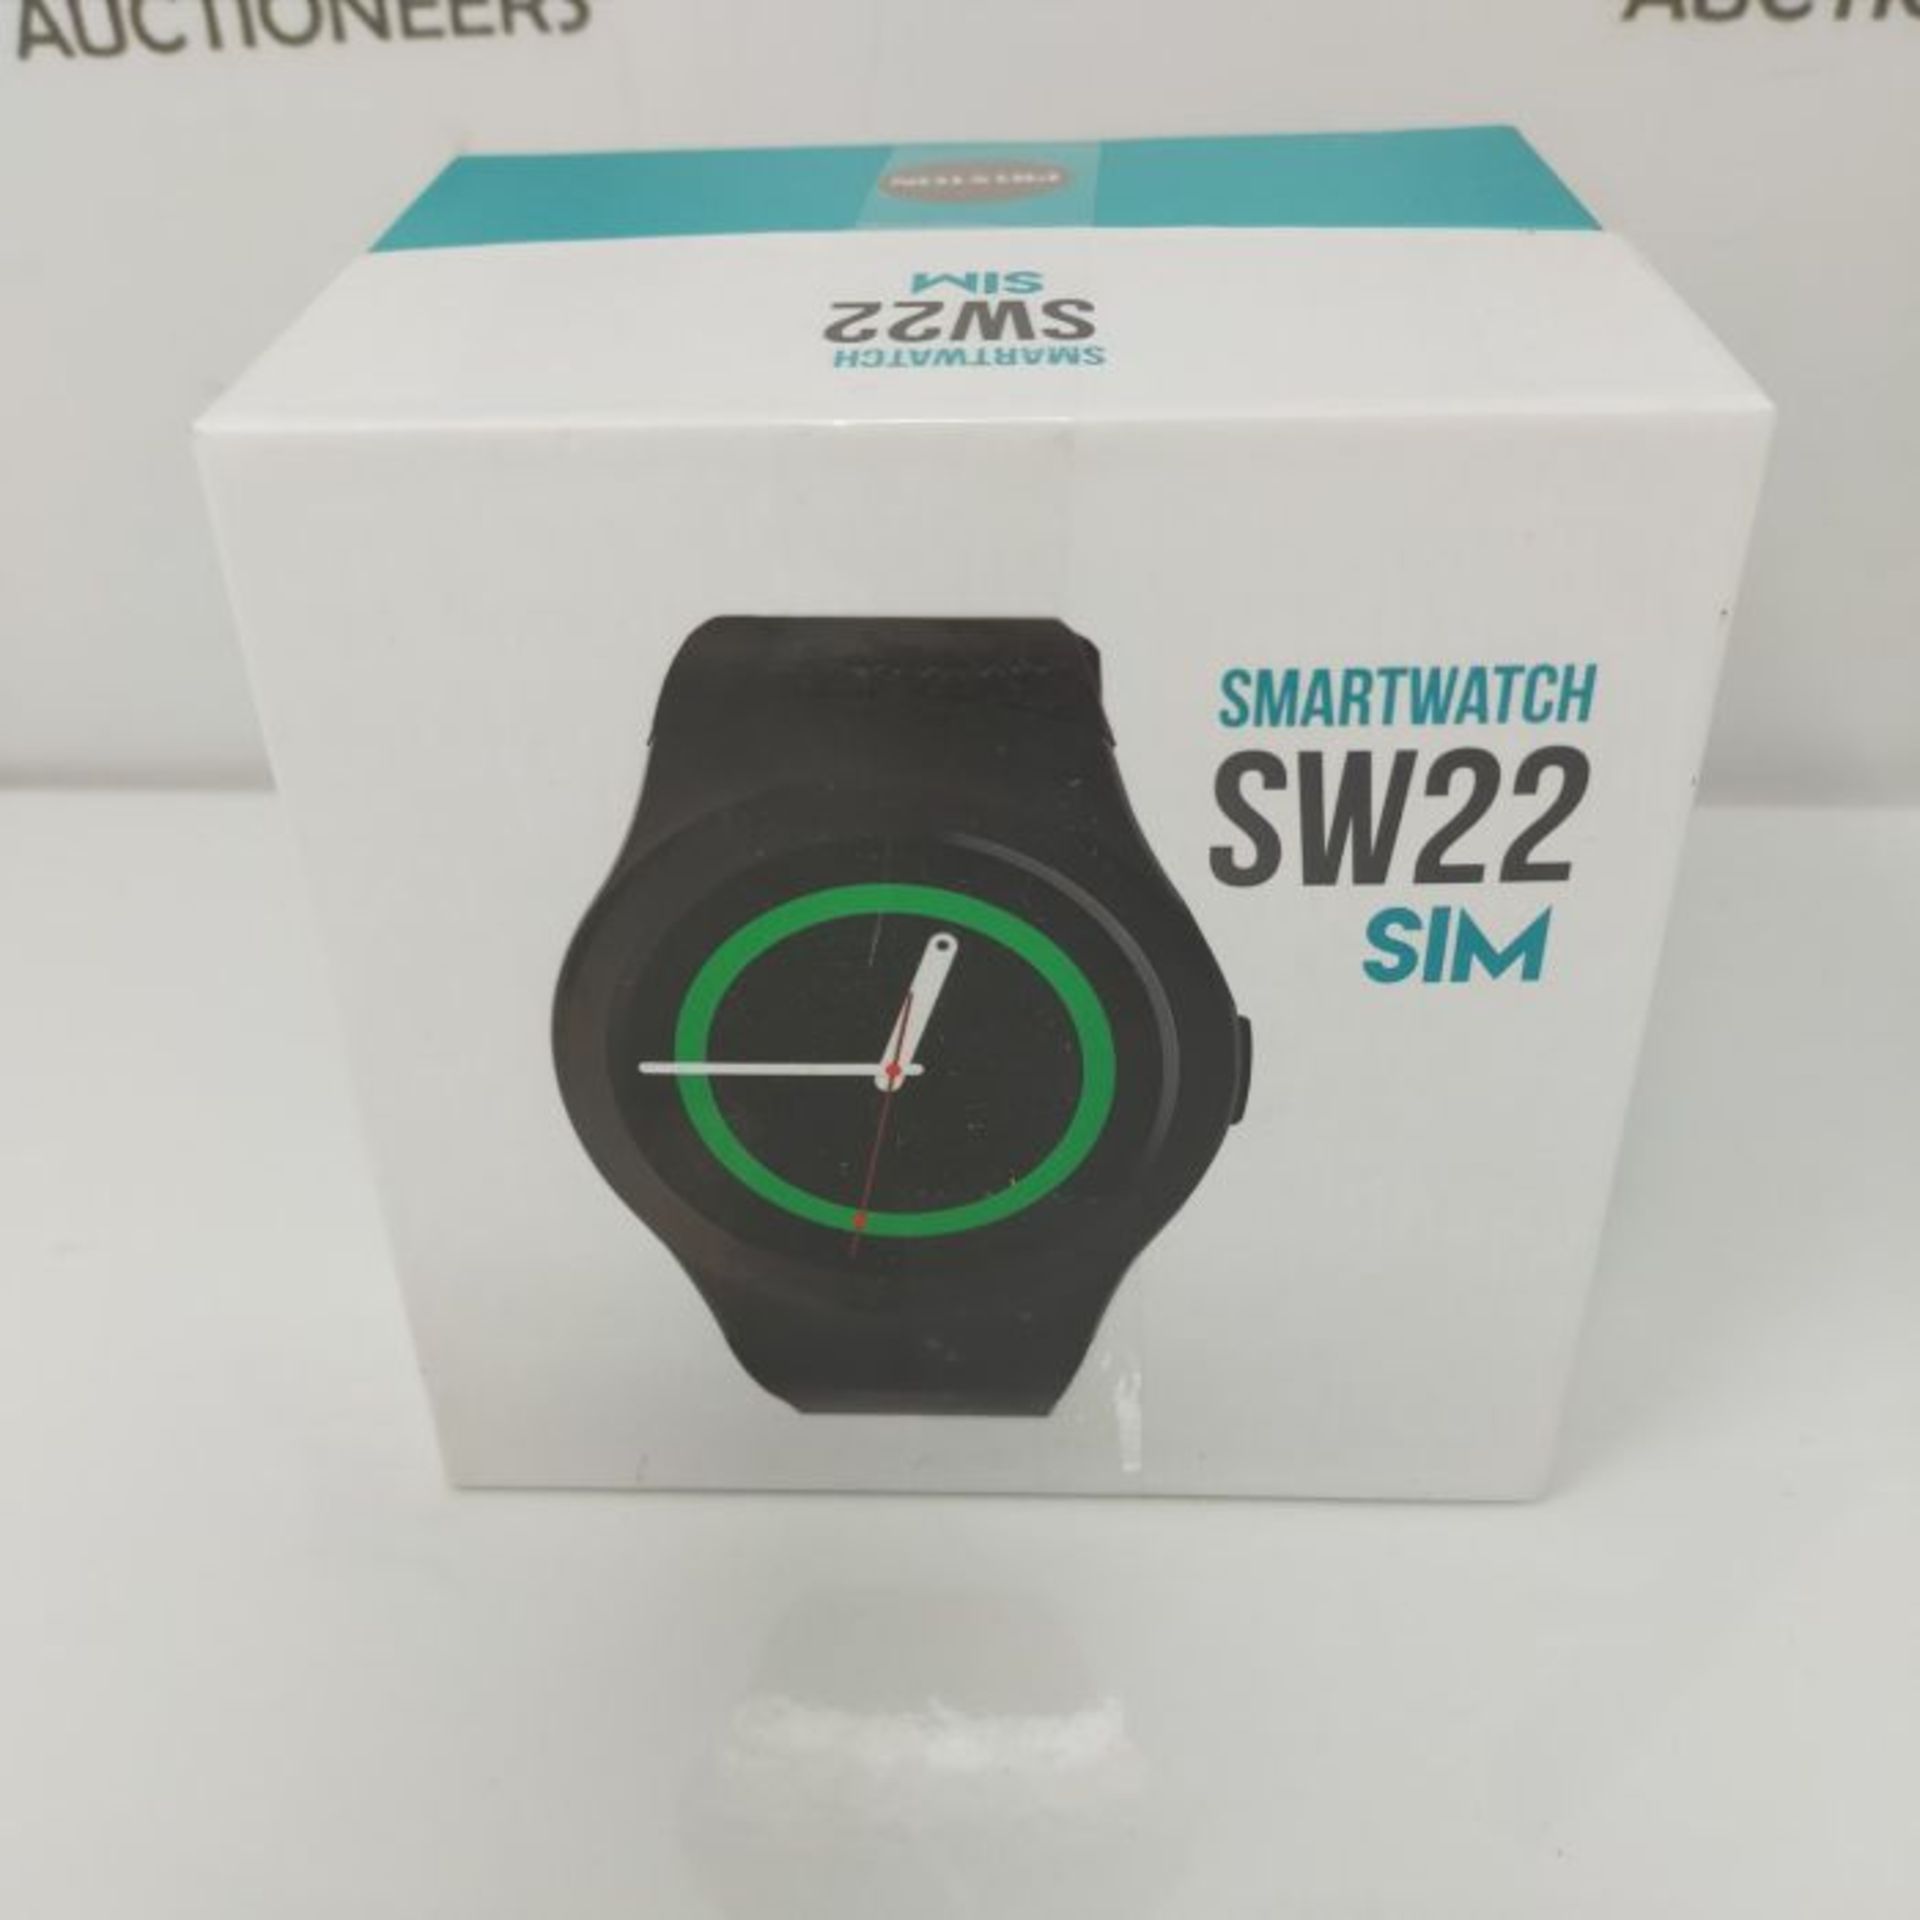 [INCOMPLETE] Prixton smartwatch sw22? - Image 2 of 3